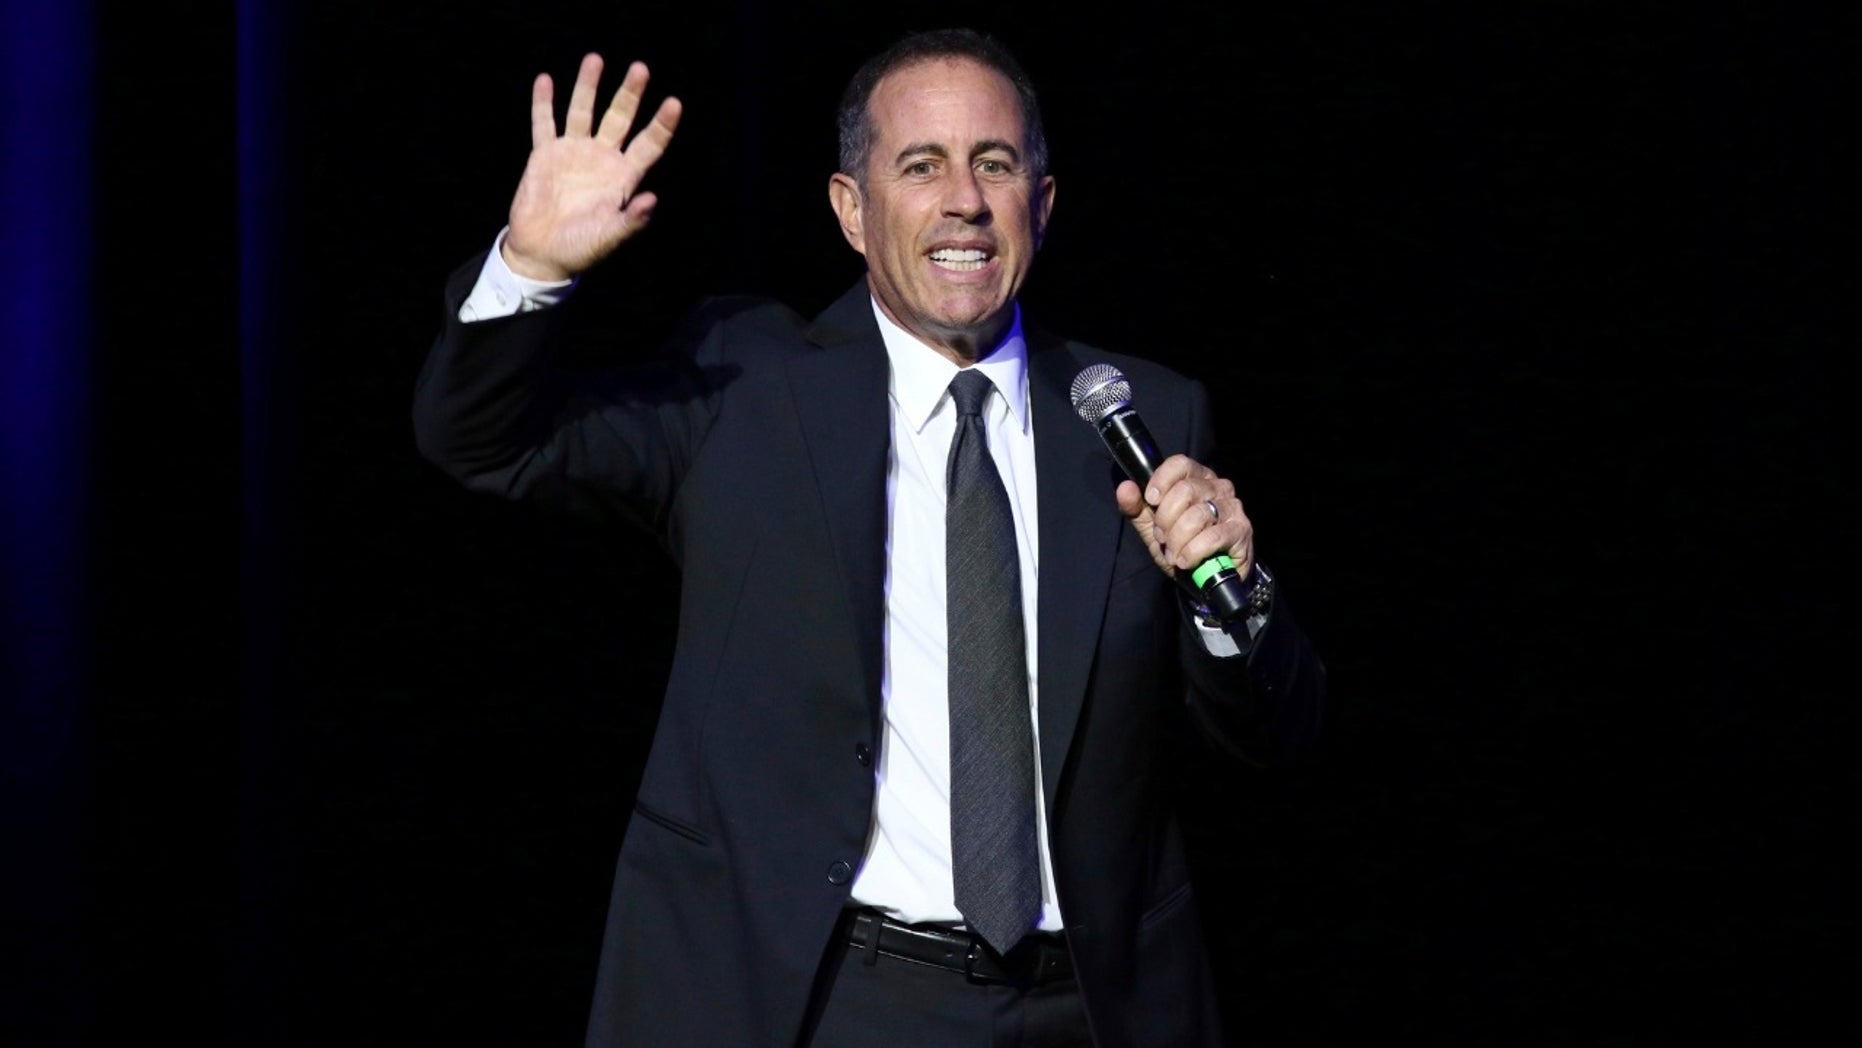 Jerry Seinfeld sued over sale of $1.5 million 1958 Porsche alleged to be fake